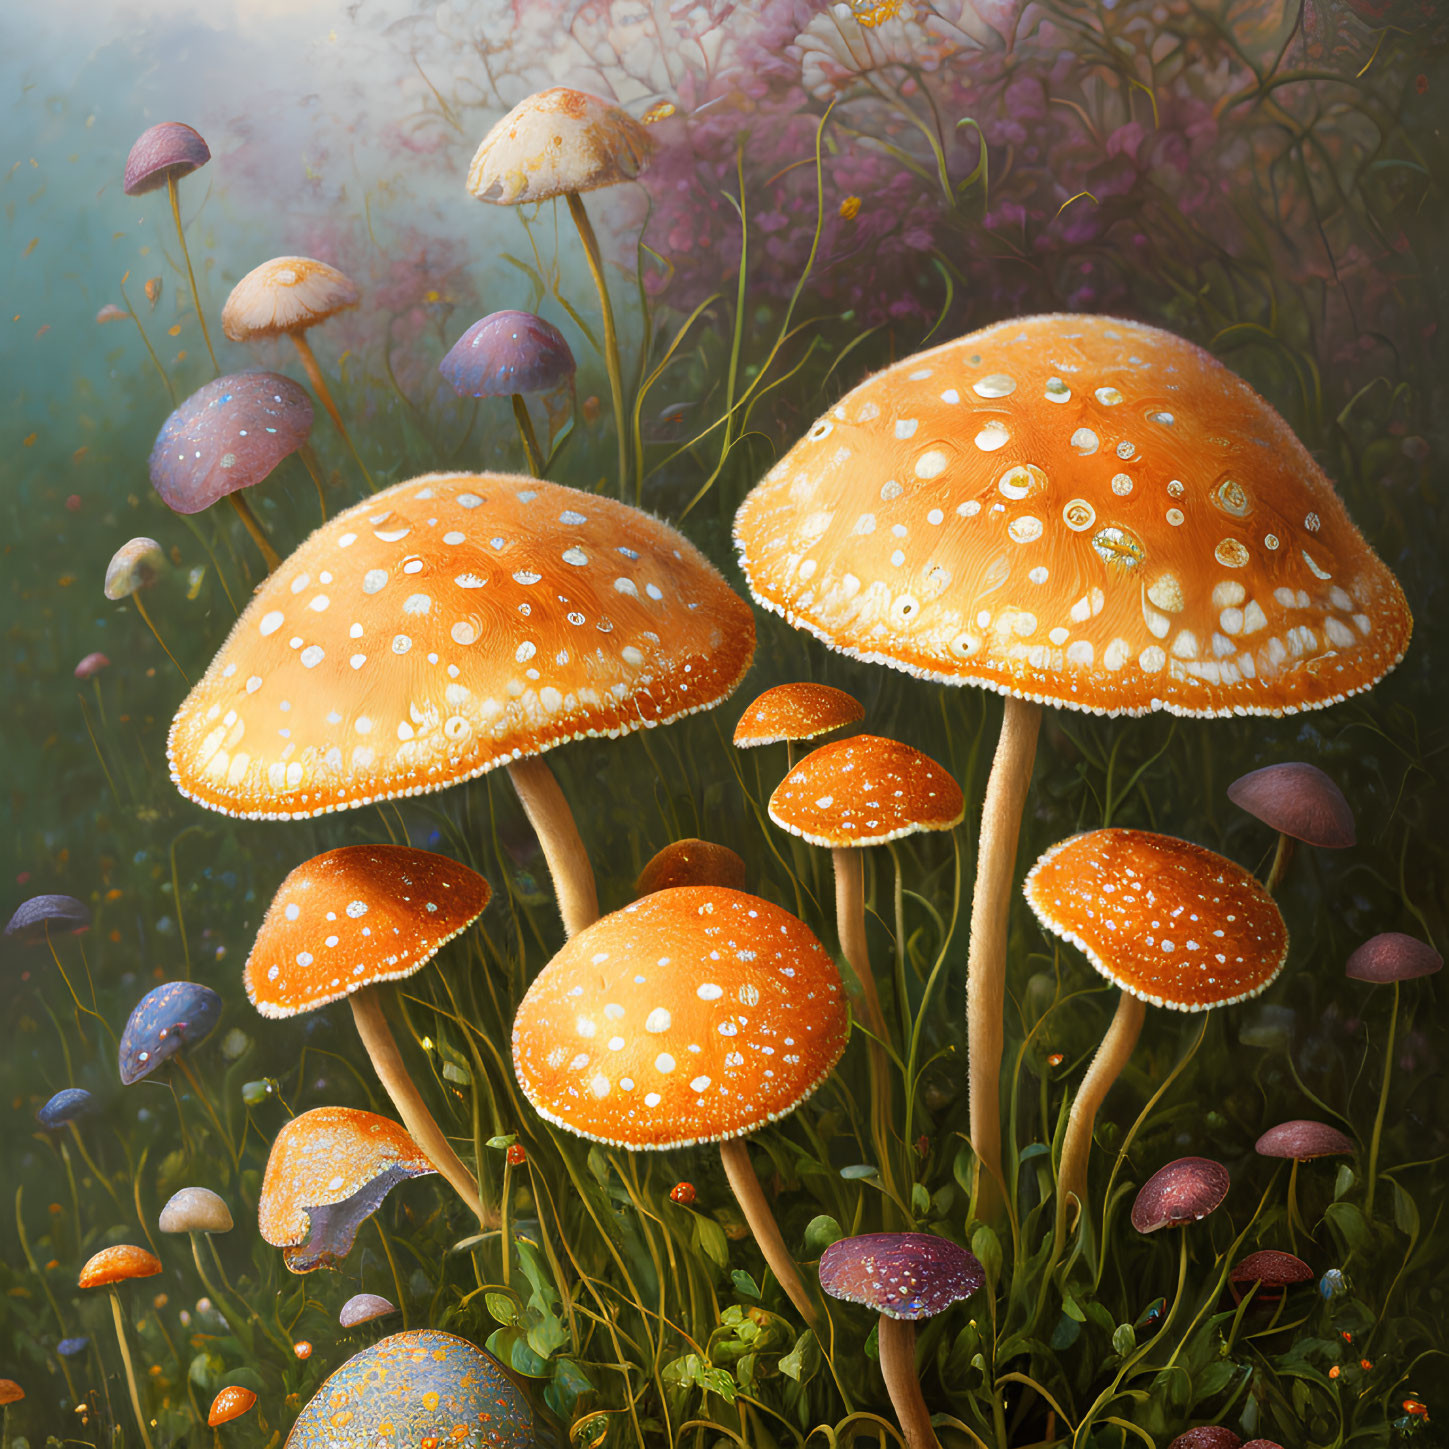 Colorful Mushrooms in Mystical Forest Scene